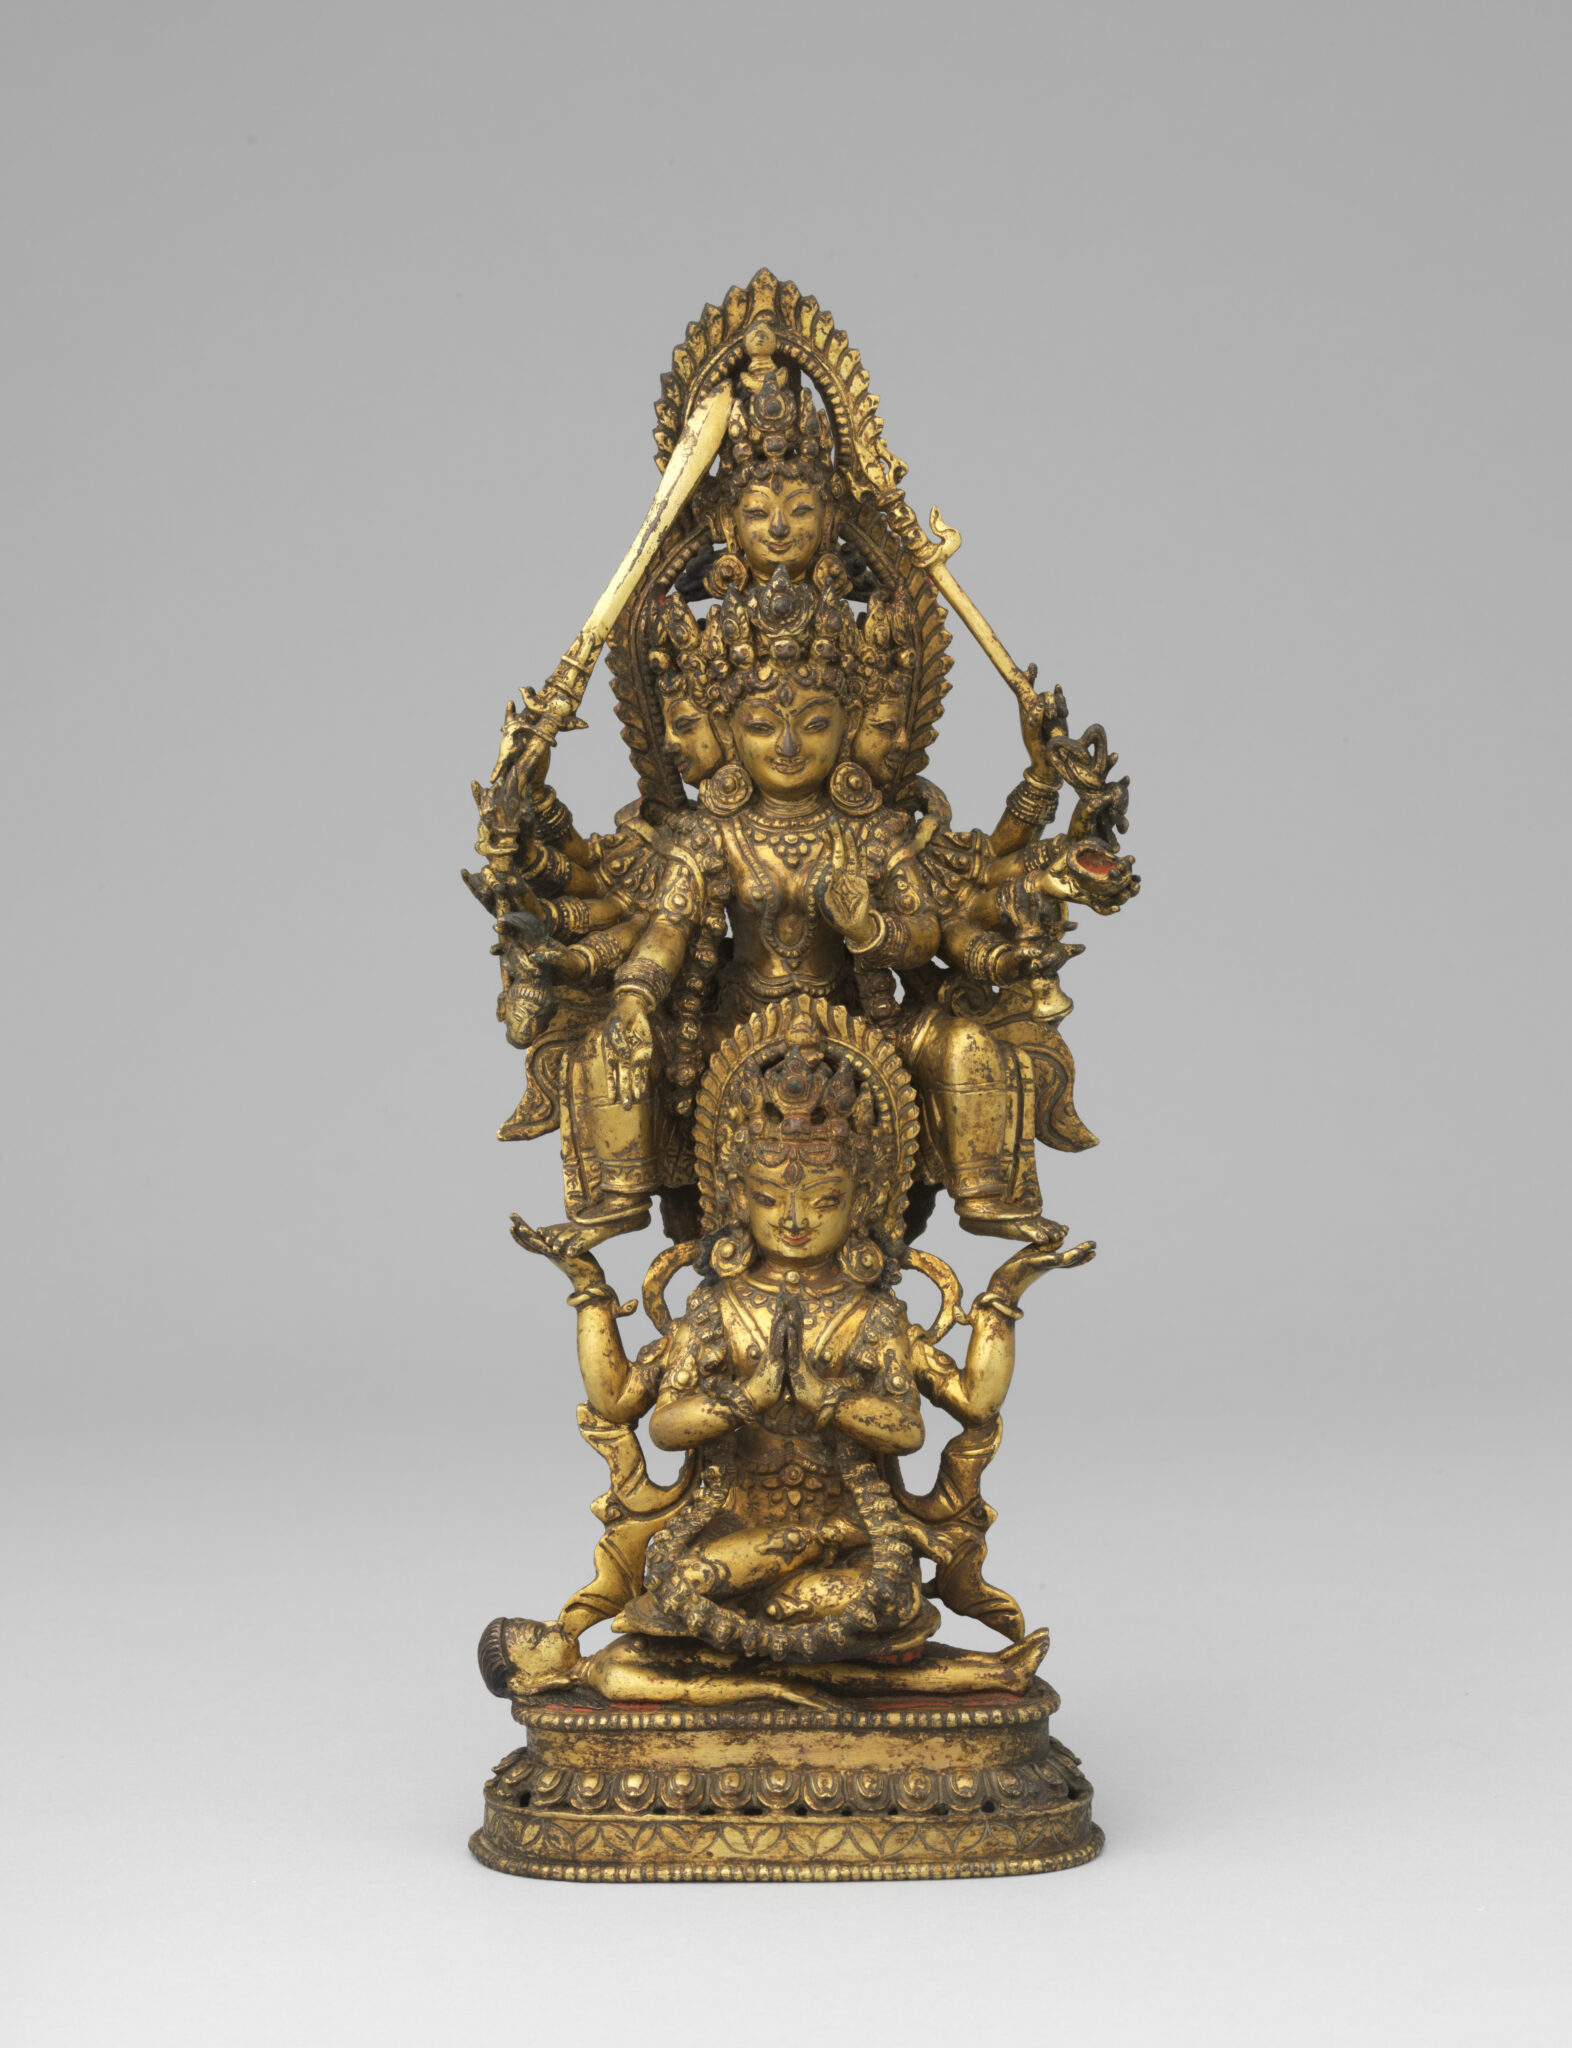 Golden statuette depicting goddess composed of two figures: below, seated figure; above, many-headed and -armed figure